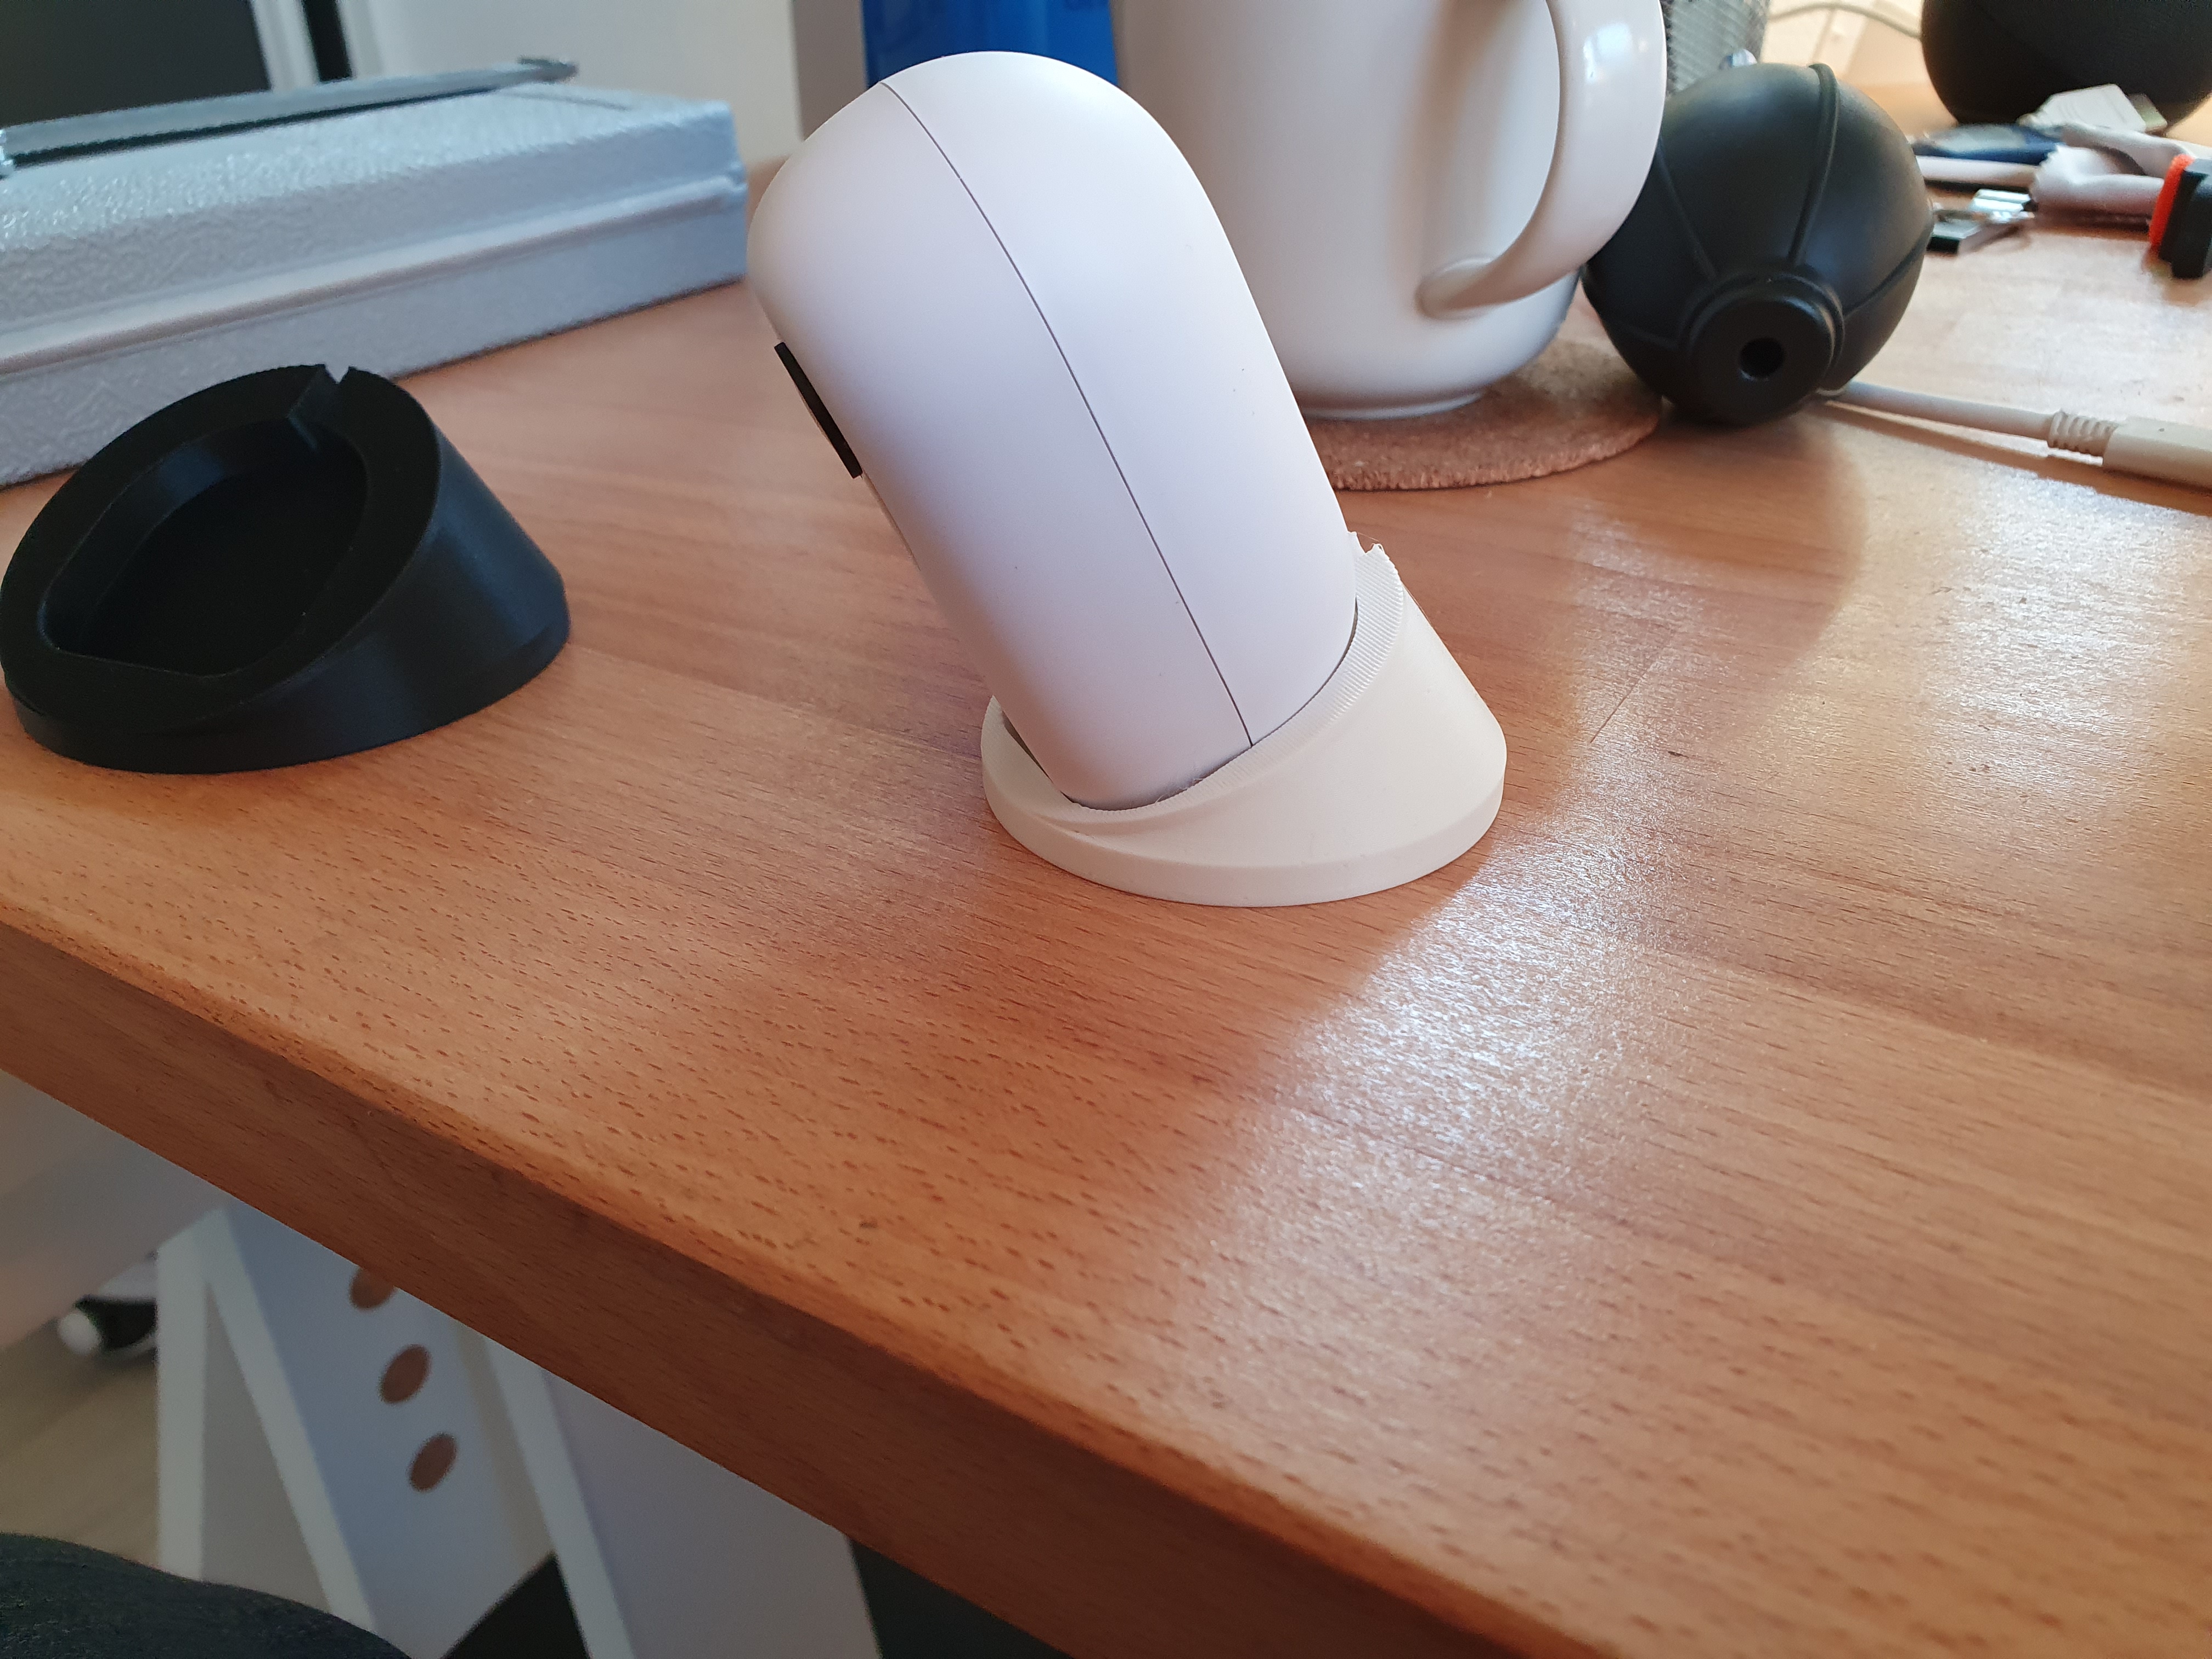 Unifi Protect G3 Instant - 25 degree angled stand